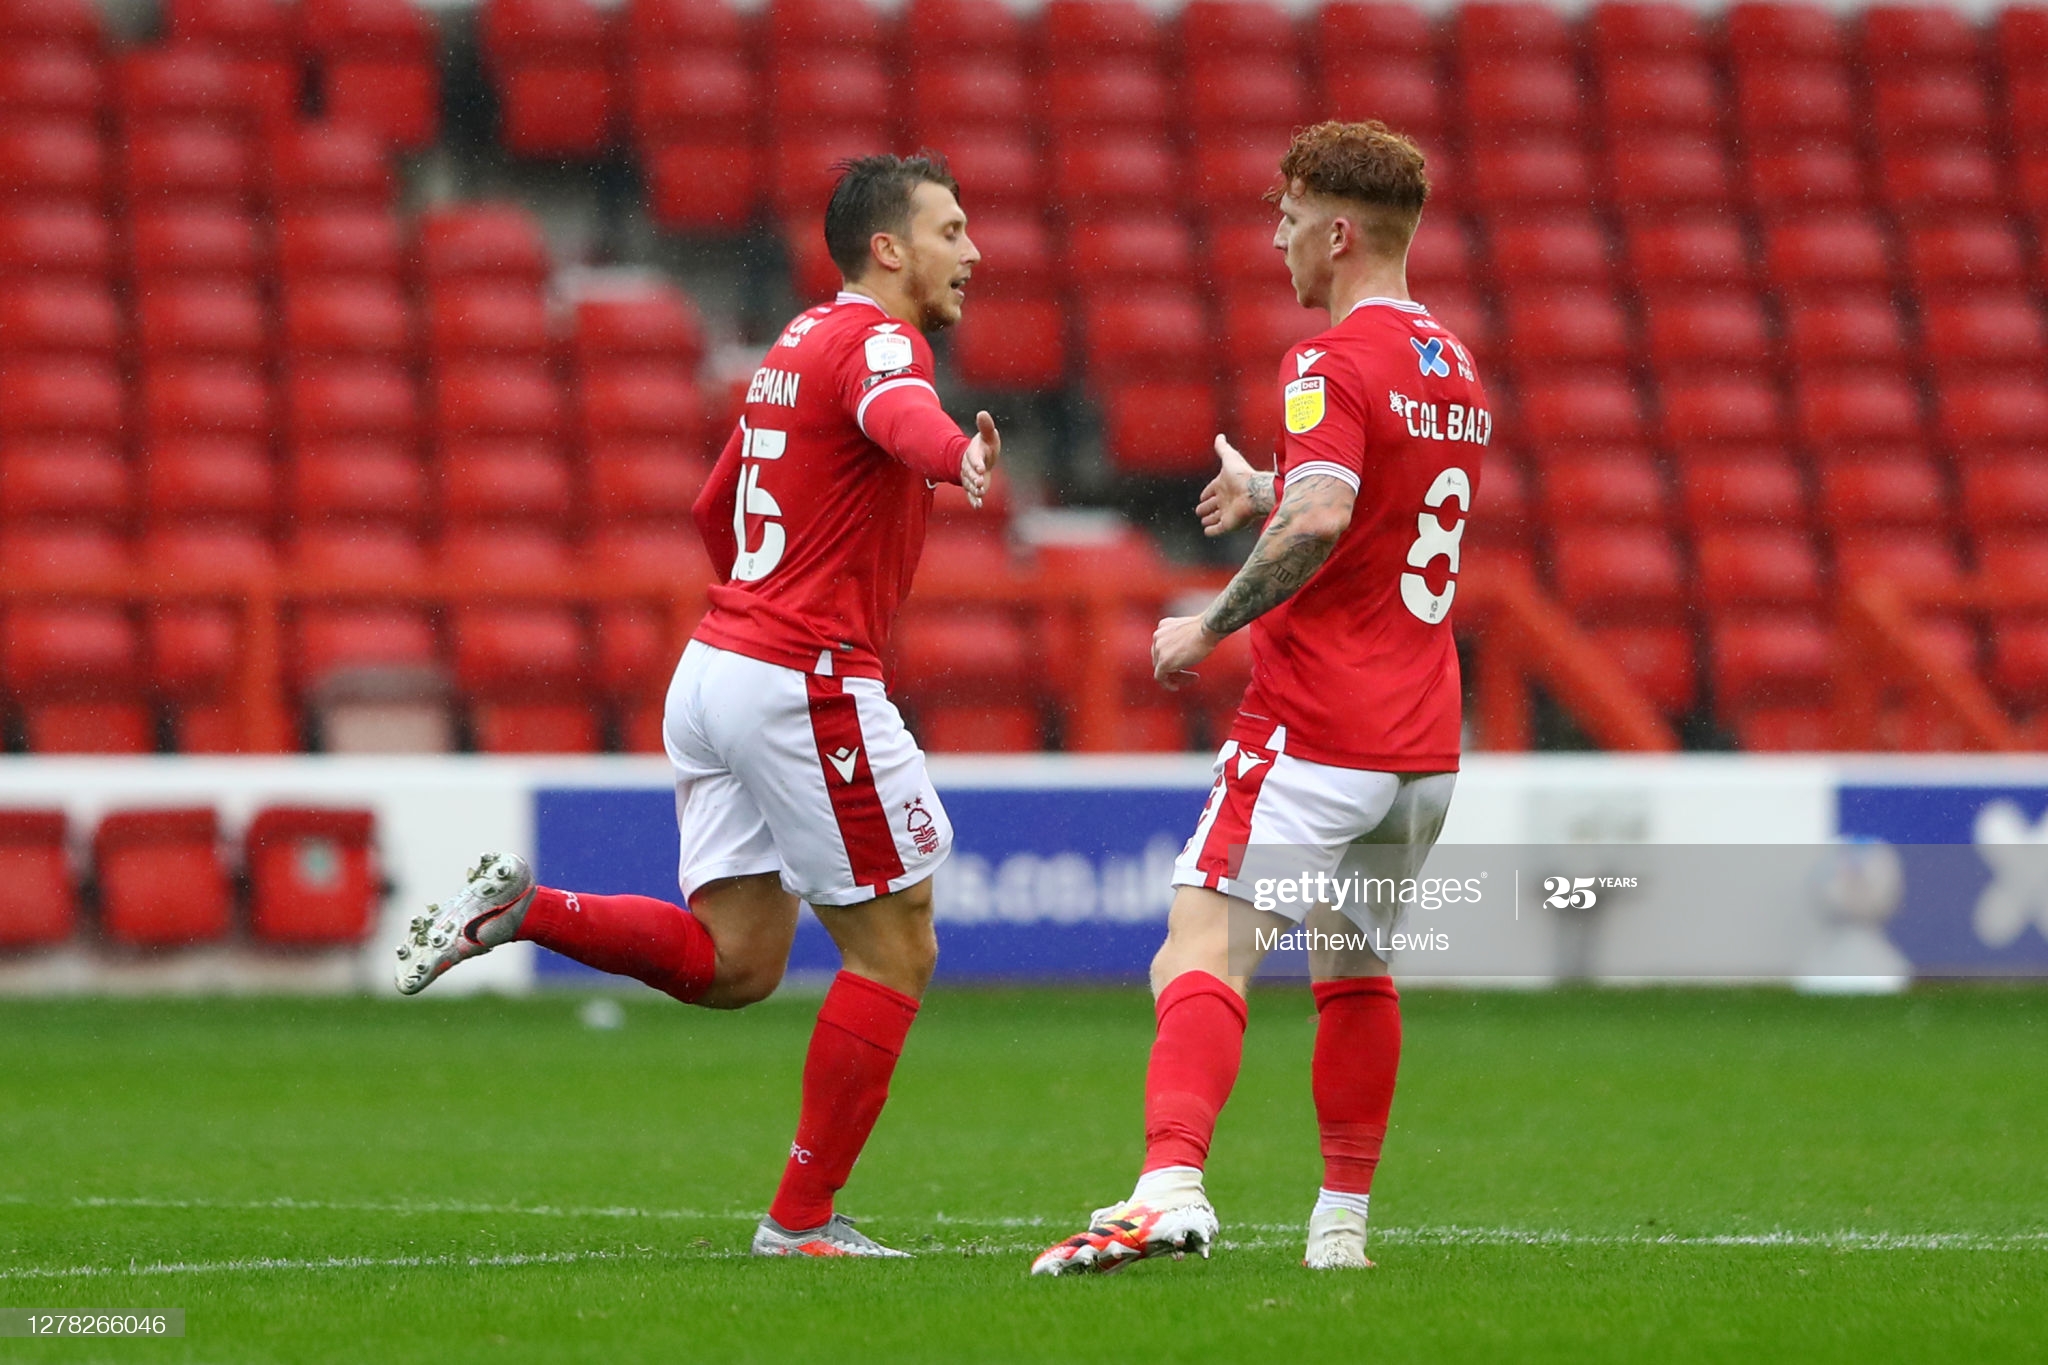 Nottingham Forest vs Derby County